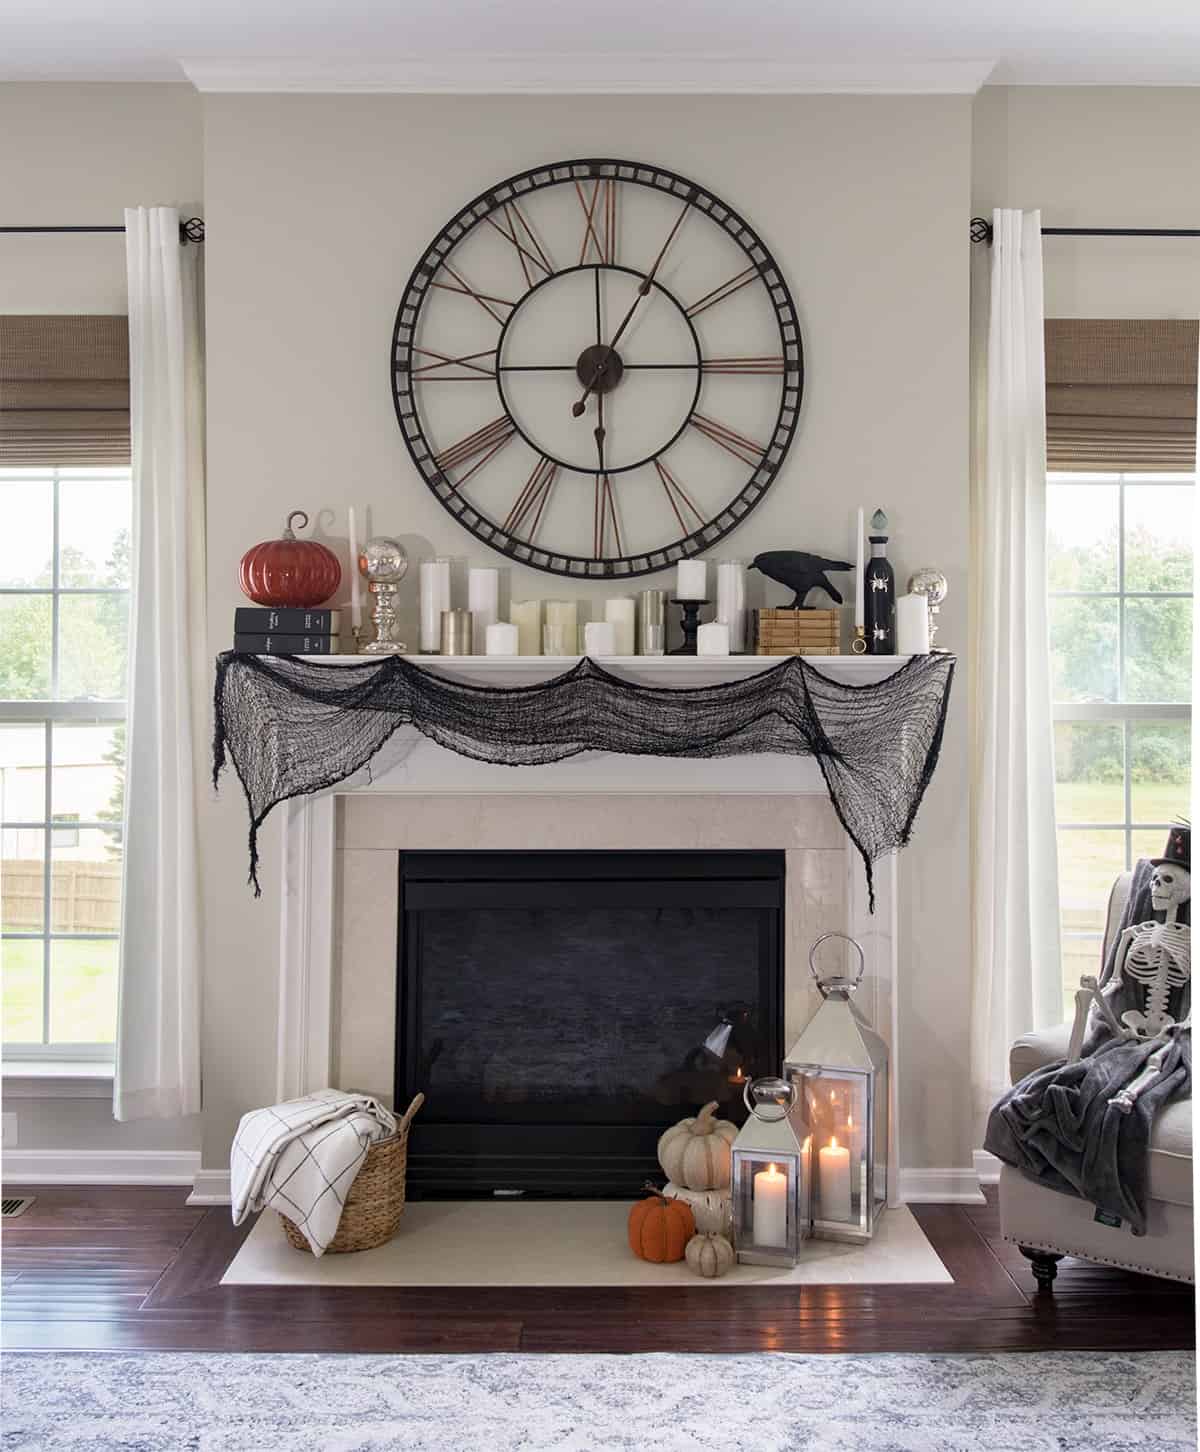 Fall Halloween mantle with giant clock, old books, and scarf garland.